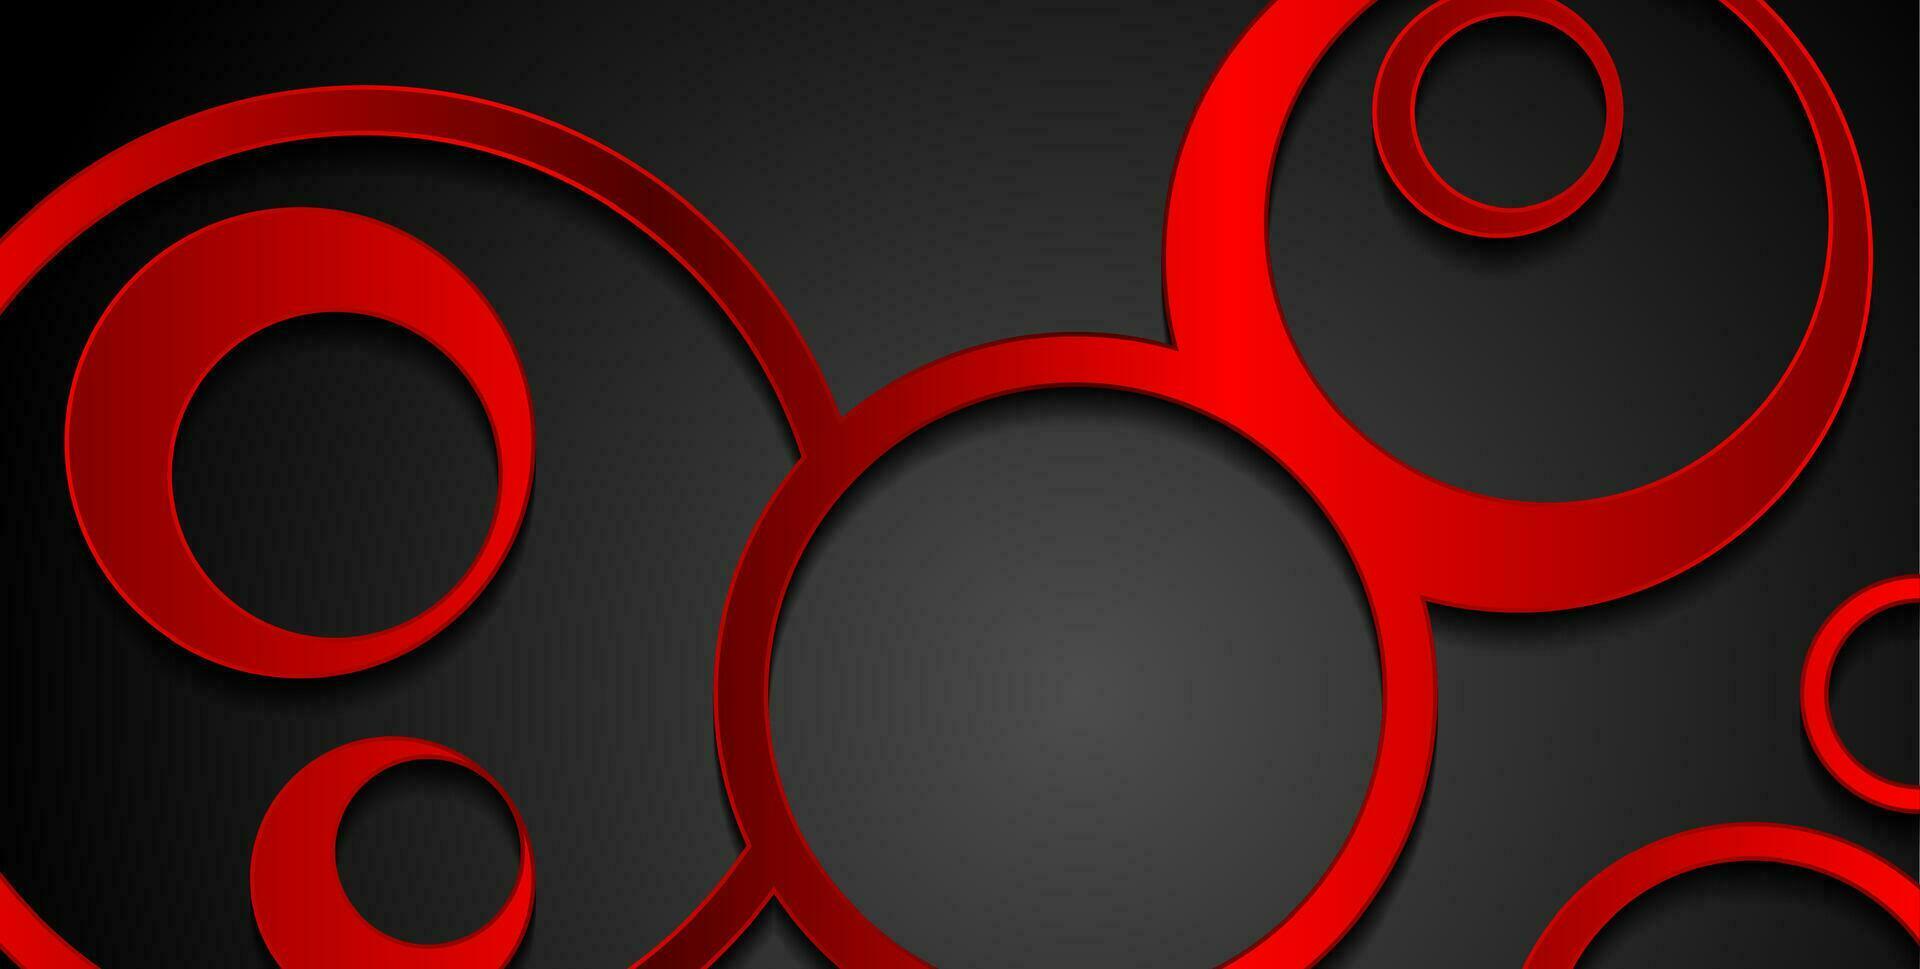 Red glossy circles abstract hi-tech background vector